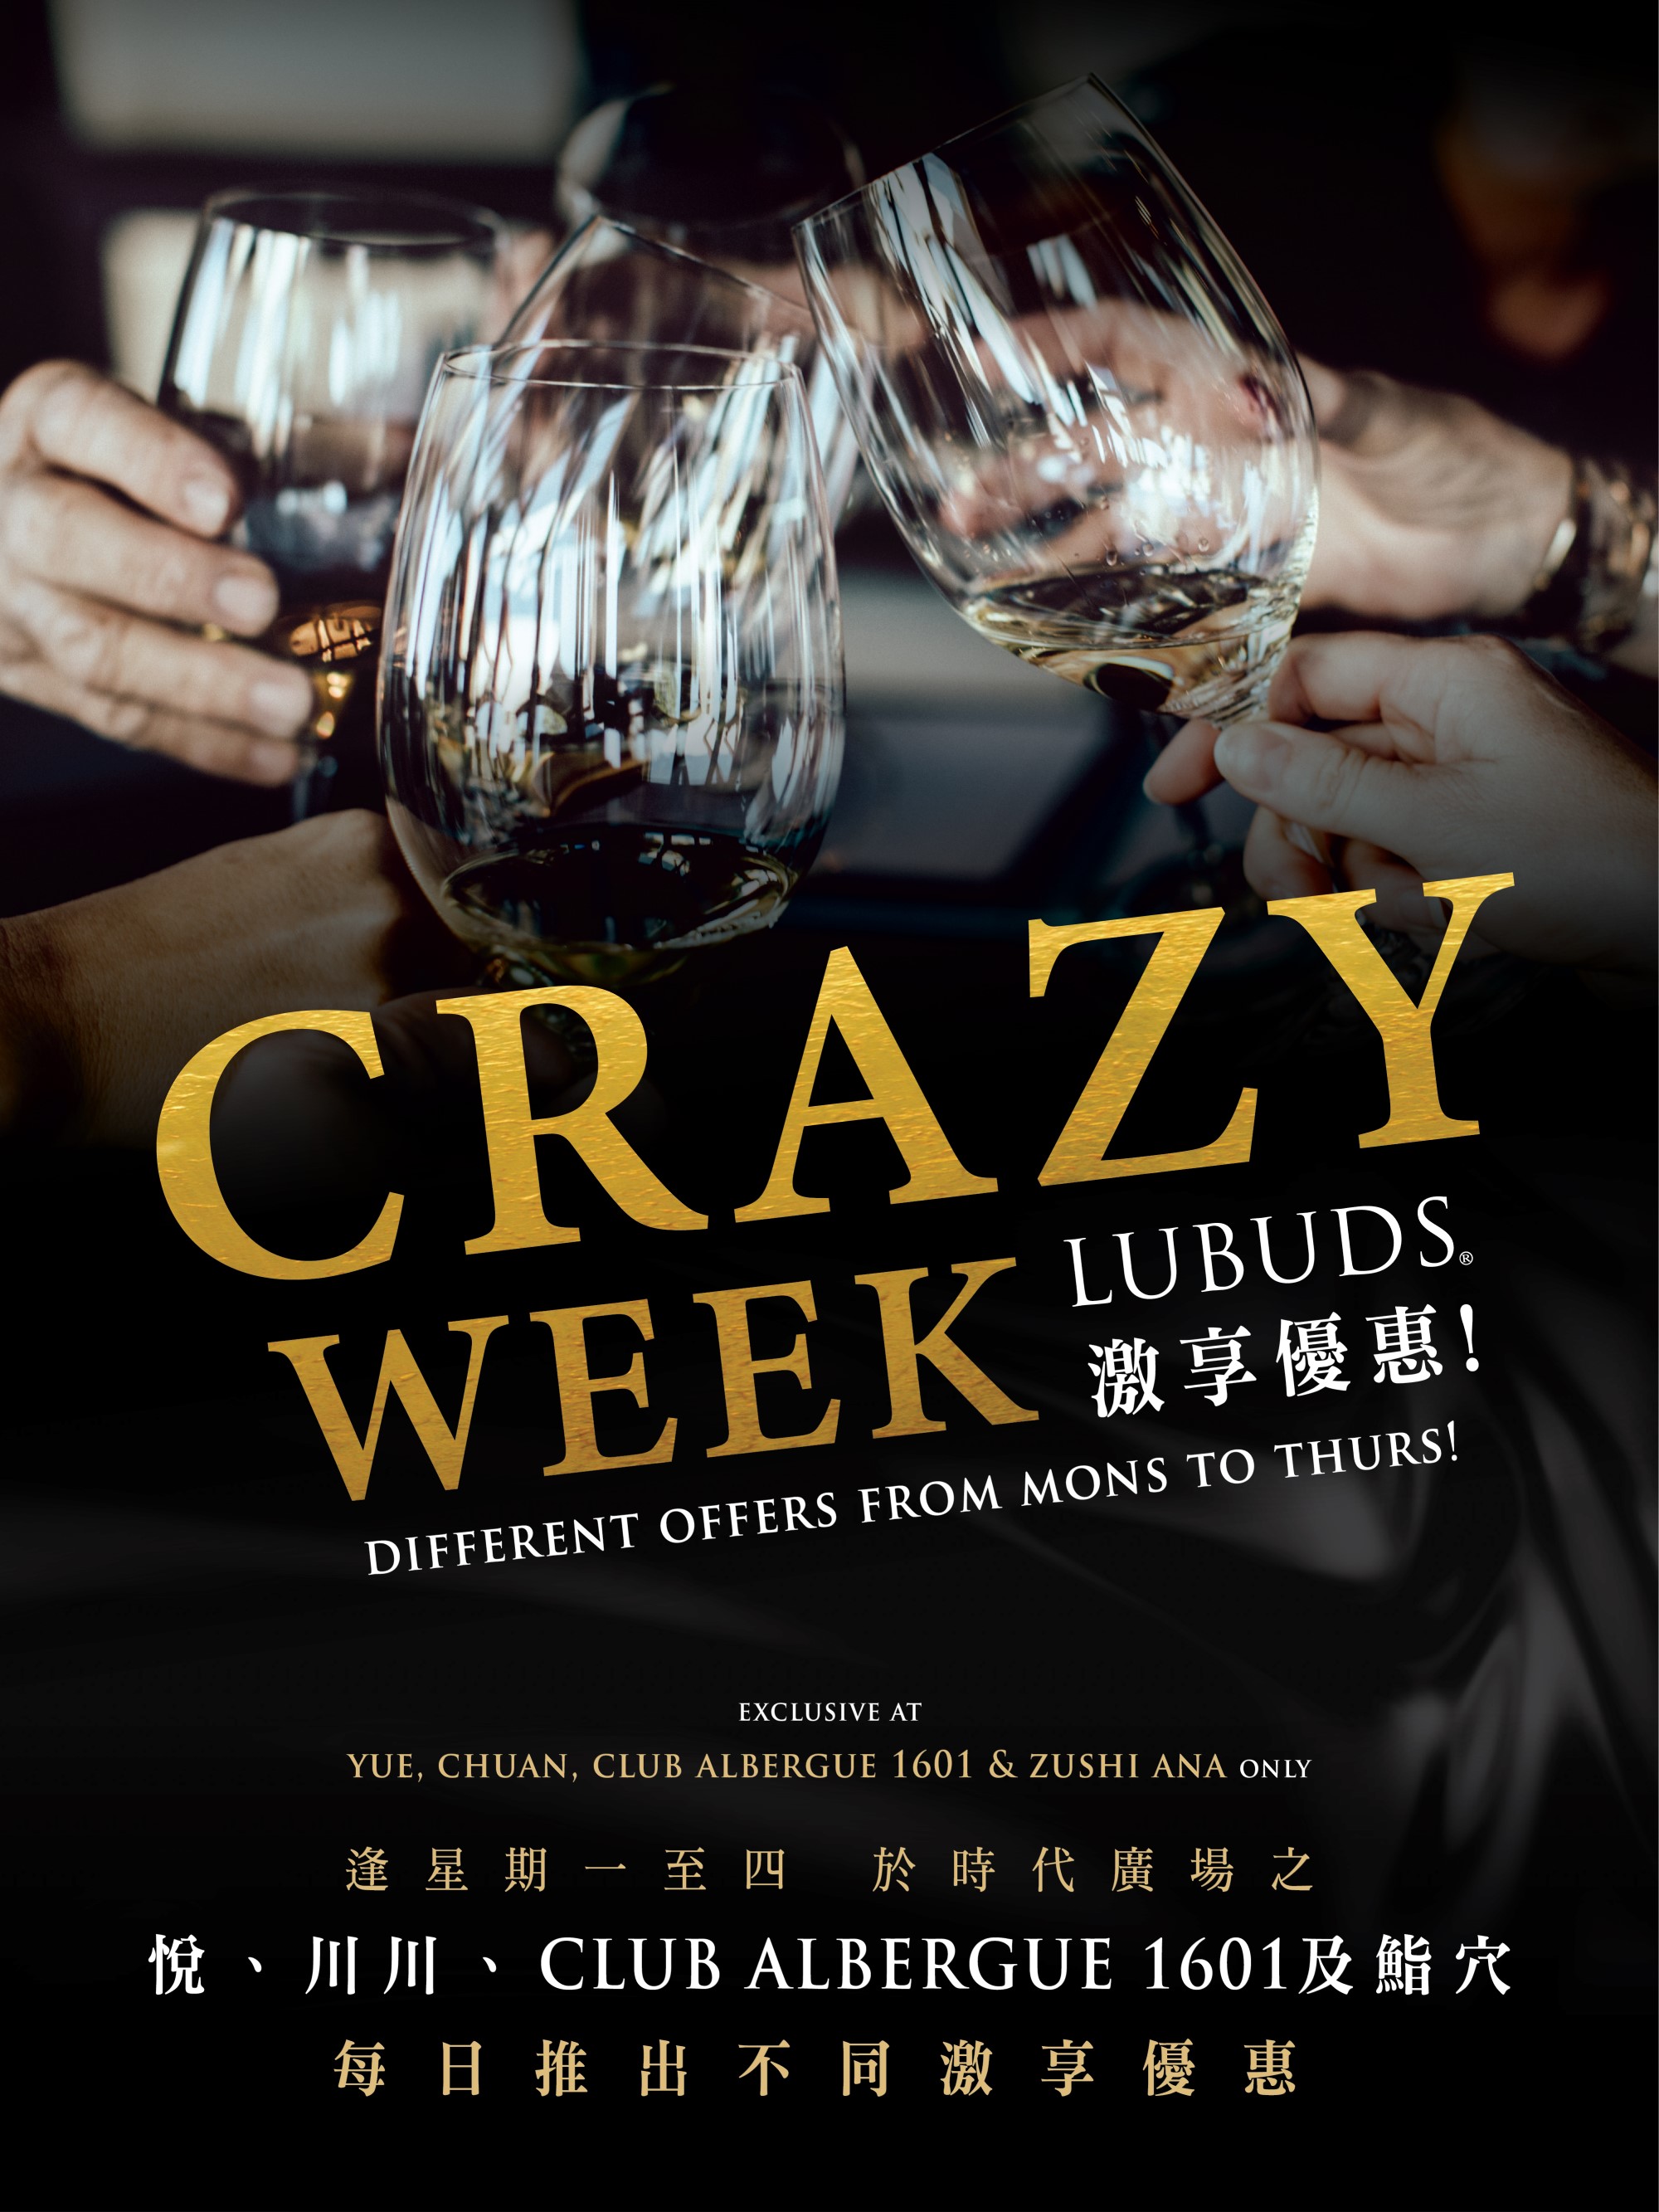 LUBUDS Group Exclusive Crazy Week Offers at Times Square!